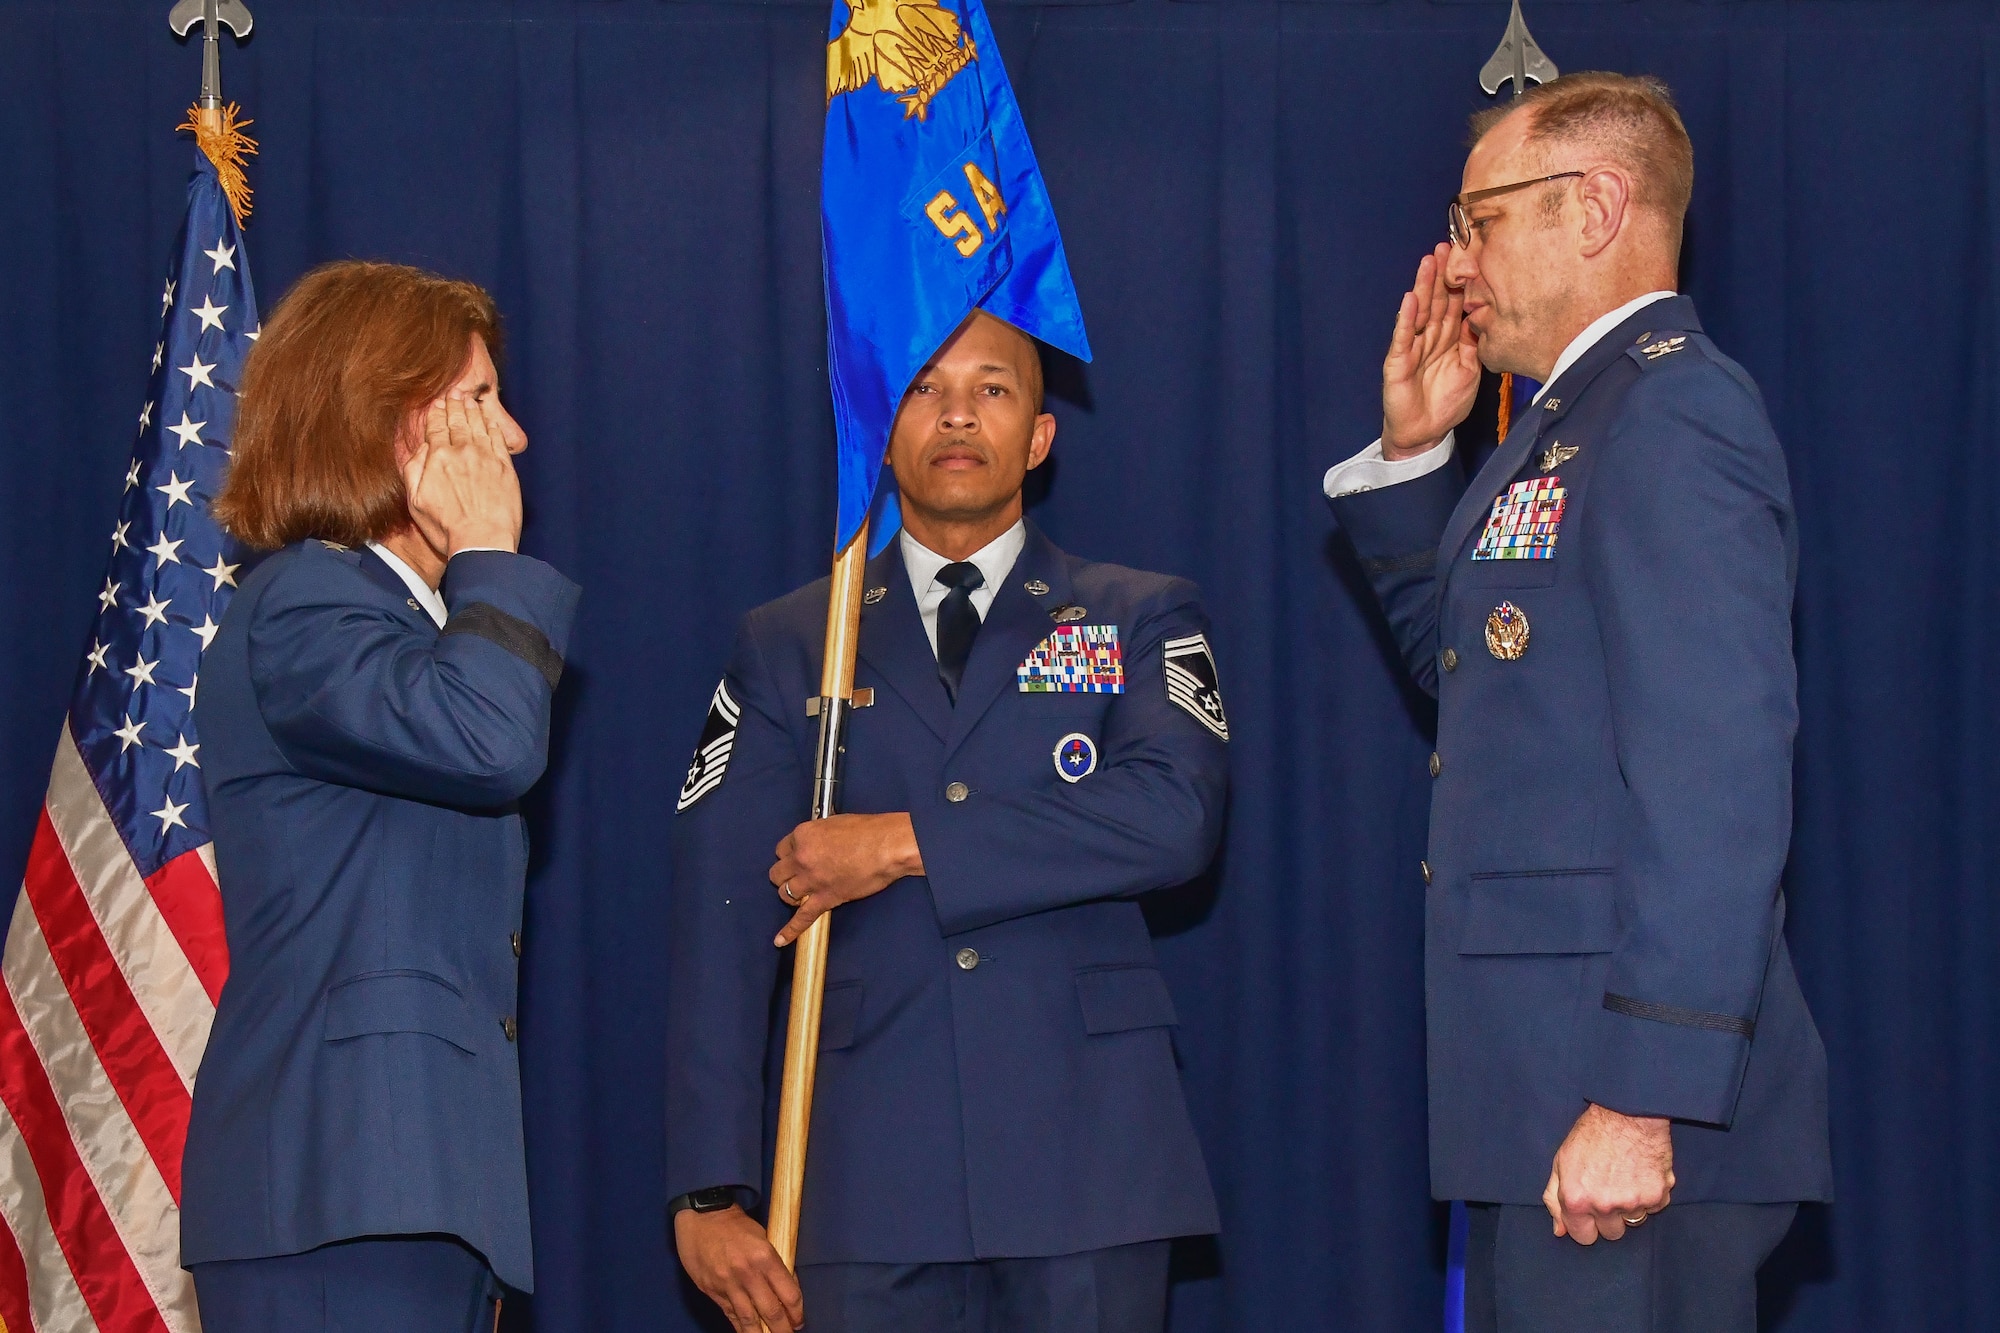 transition of leadership for the School of Advanced Air and Space Studies, where Colonel Jason Trew handed over command to Colonel Robert O'Keefe